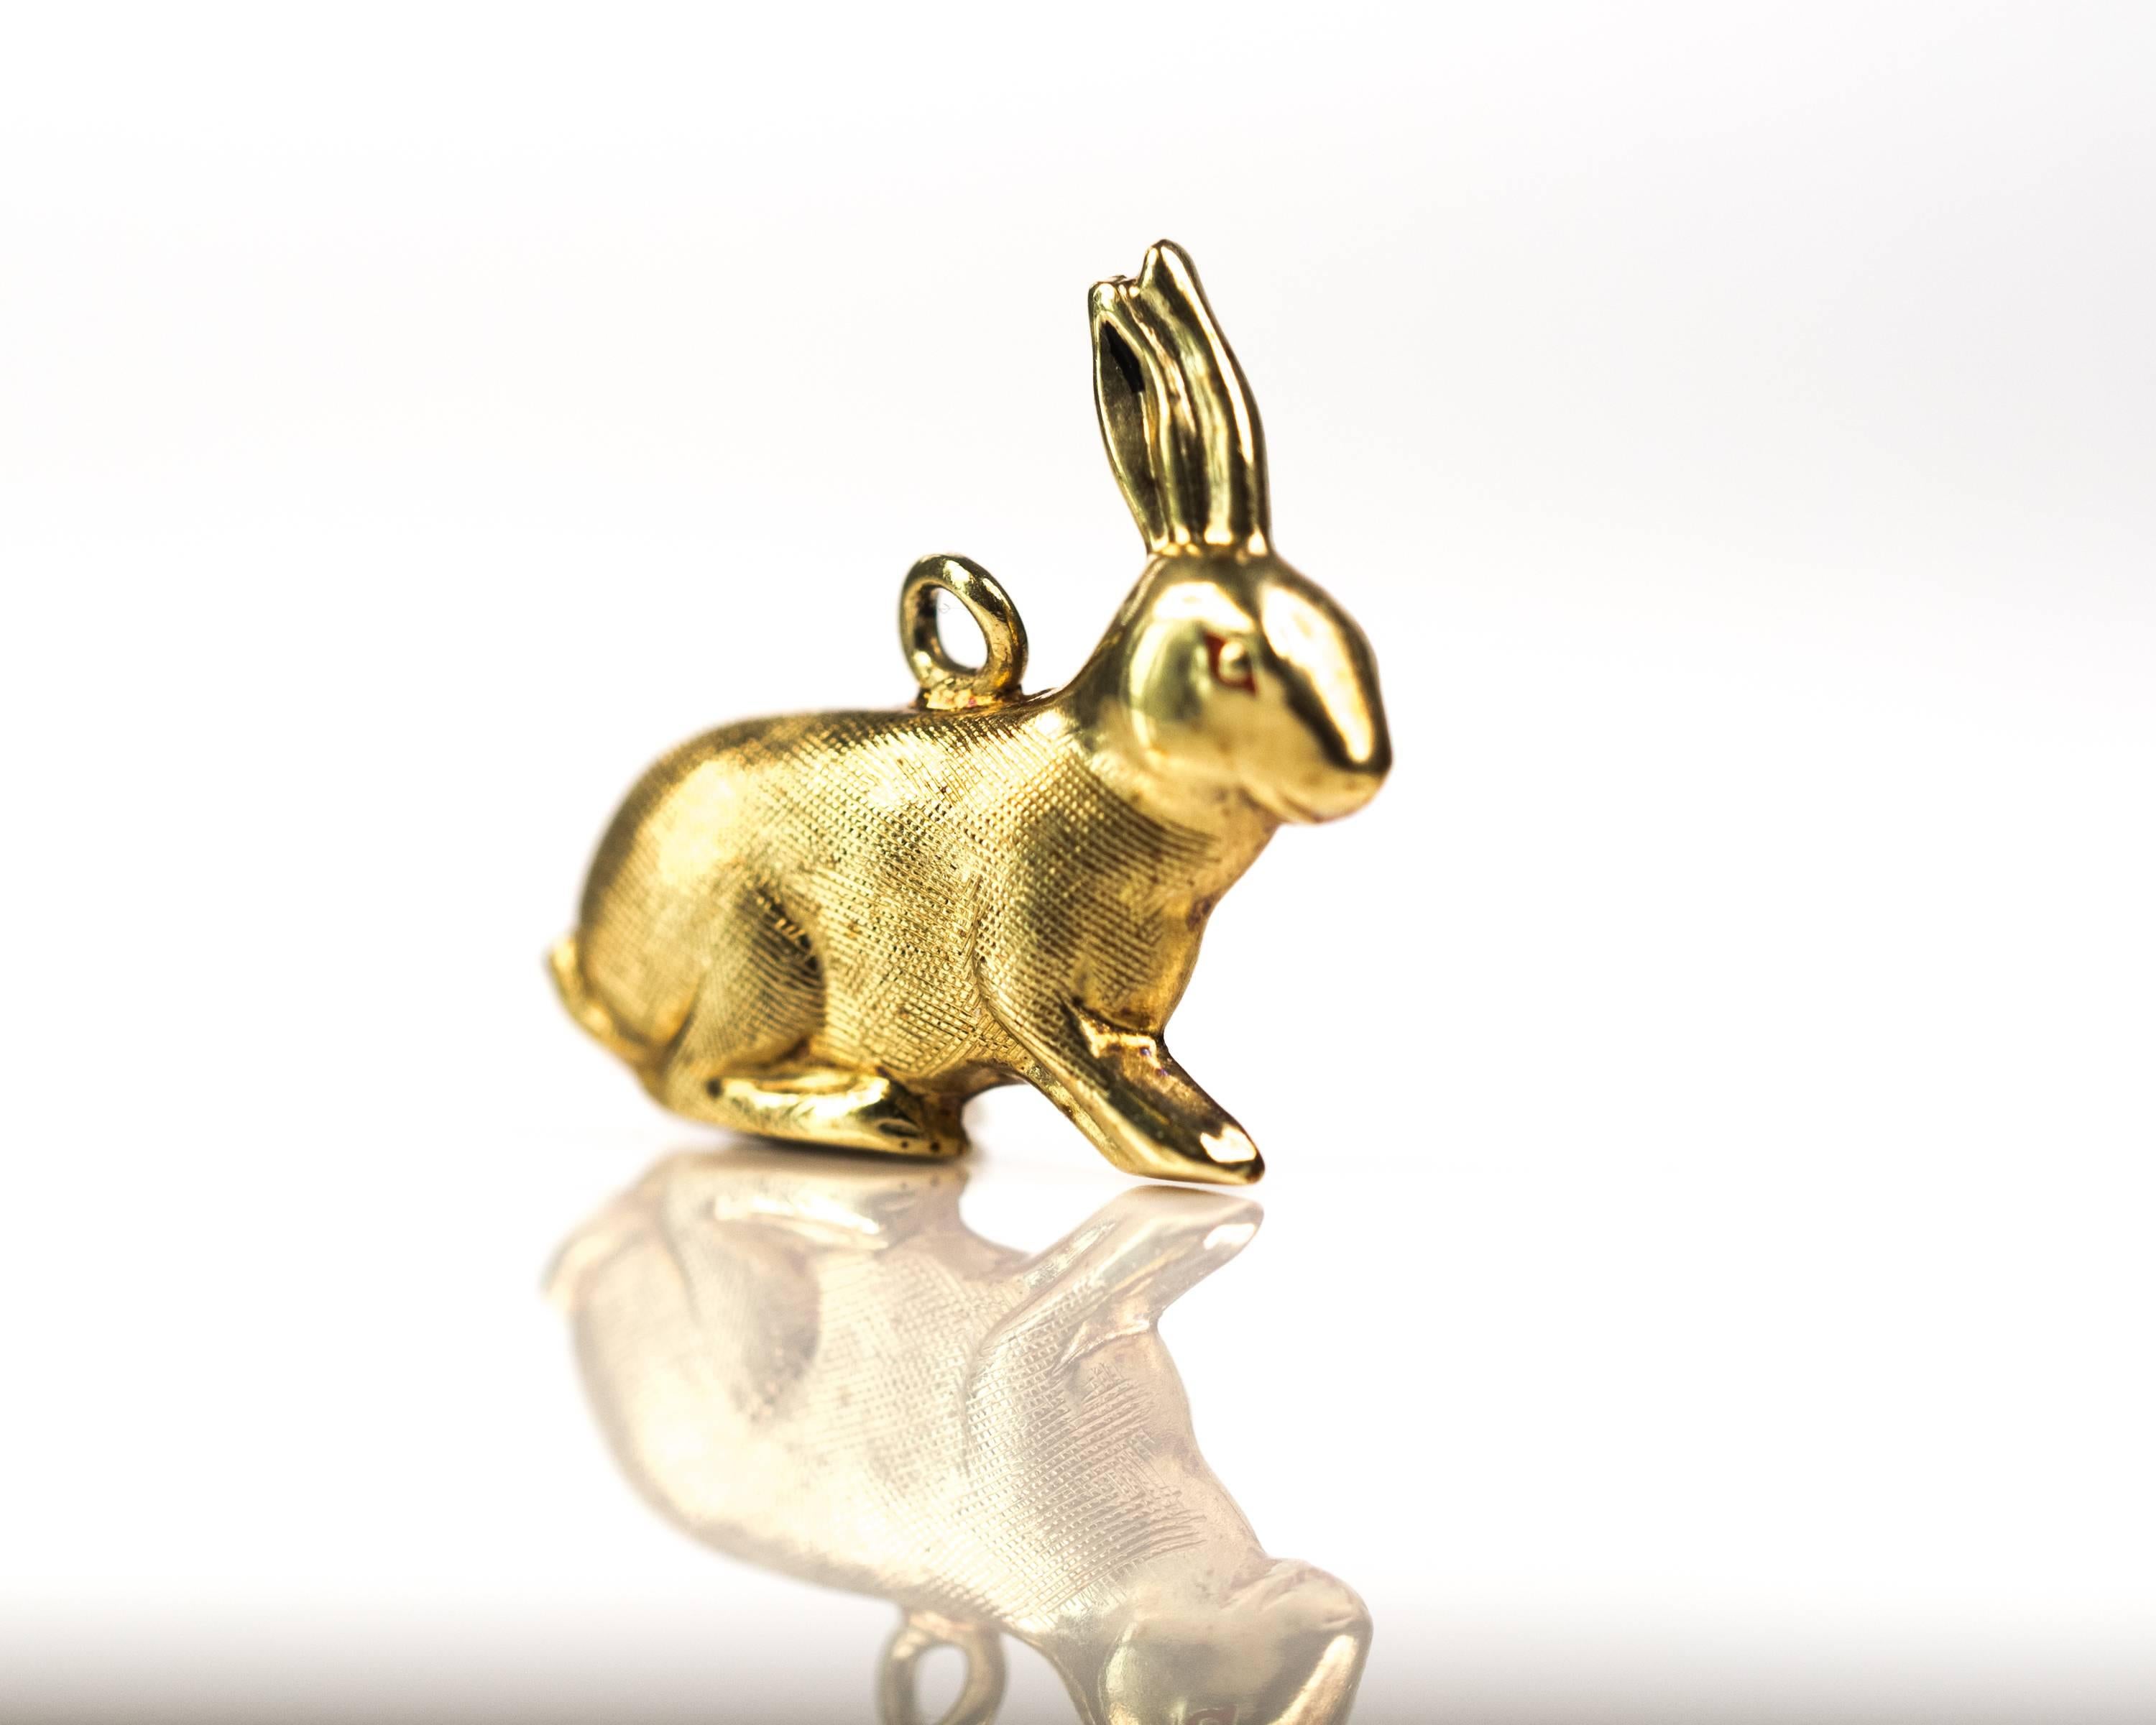 1950s Bunny Rabbit Charm - 14 Karat Yellow Gold

This 14 Karat Yellow Gold Bunny Rabbit is in a sitting position. 2 erect ears are positioned at the top of the head. The face is detailed with 2 eyes, nostrils and a tiny mouth. One eye has red enamel